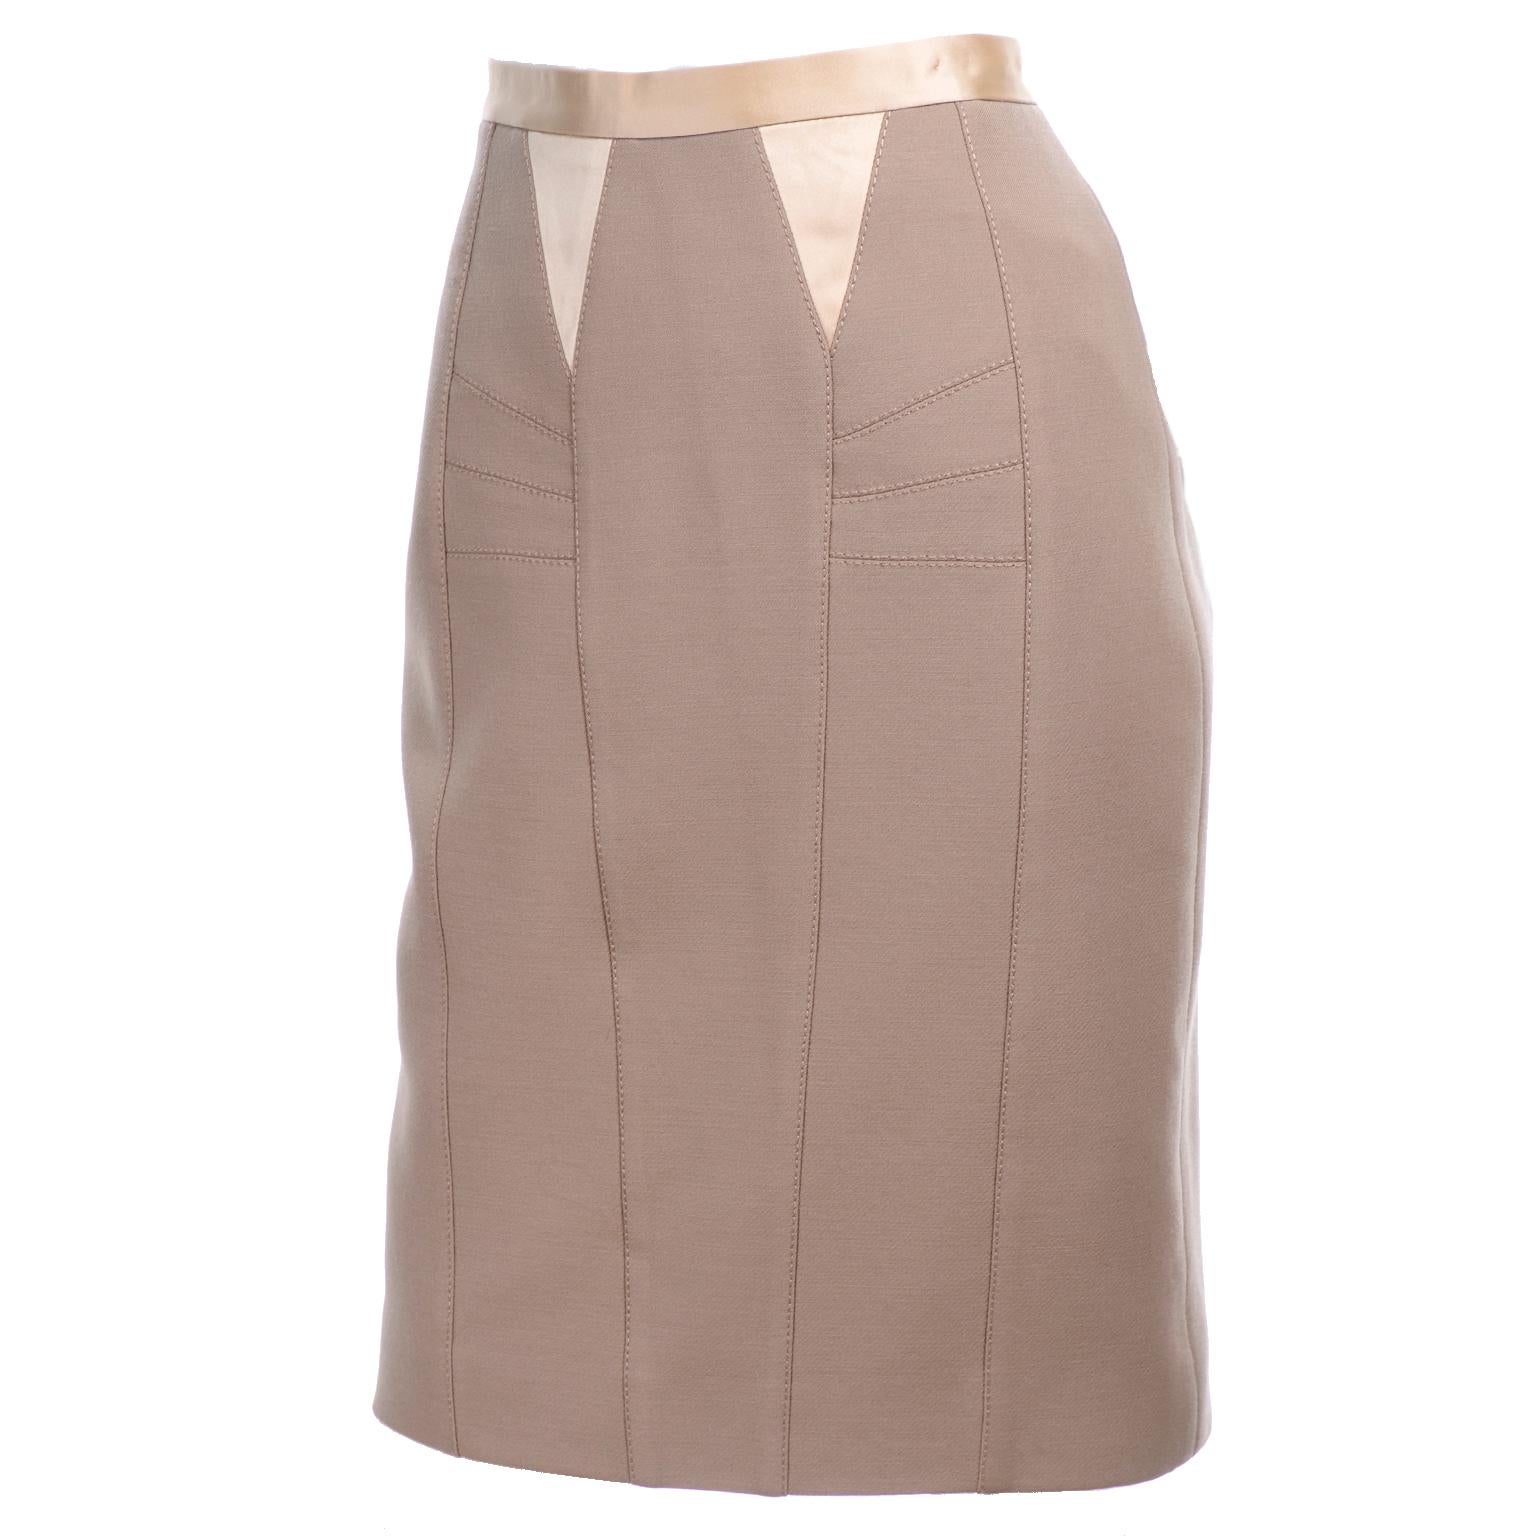 Dolce & Gabbana Pencil Skirt With Satin Trim and Cheetah Print Lining For Sale